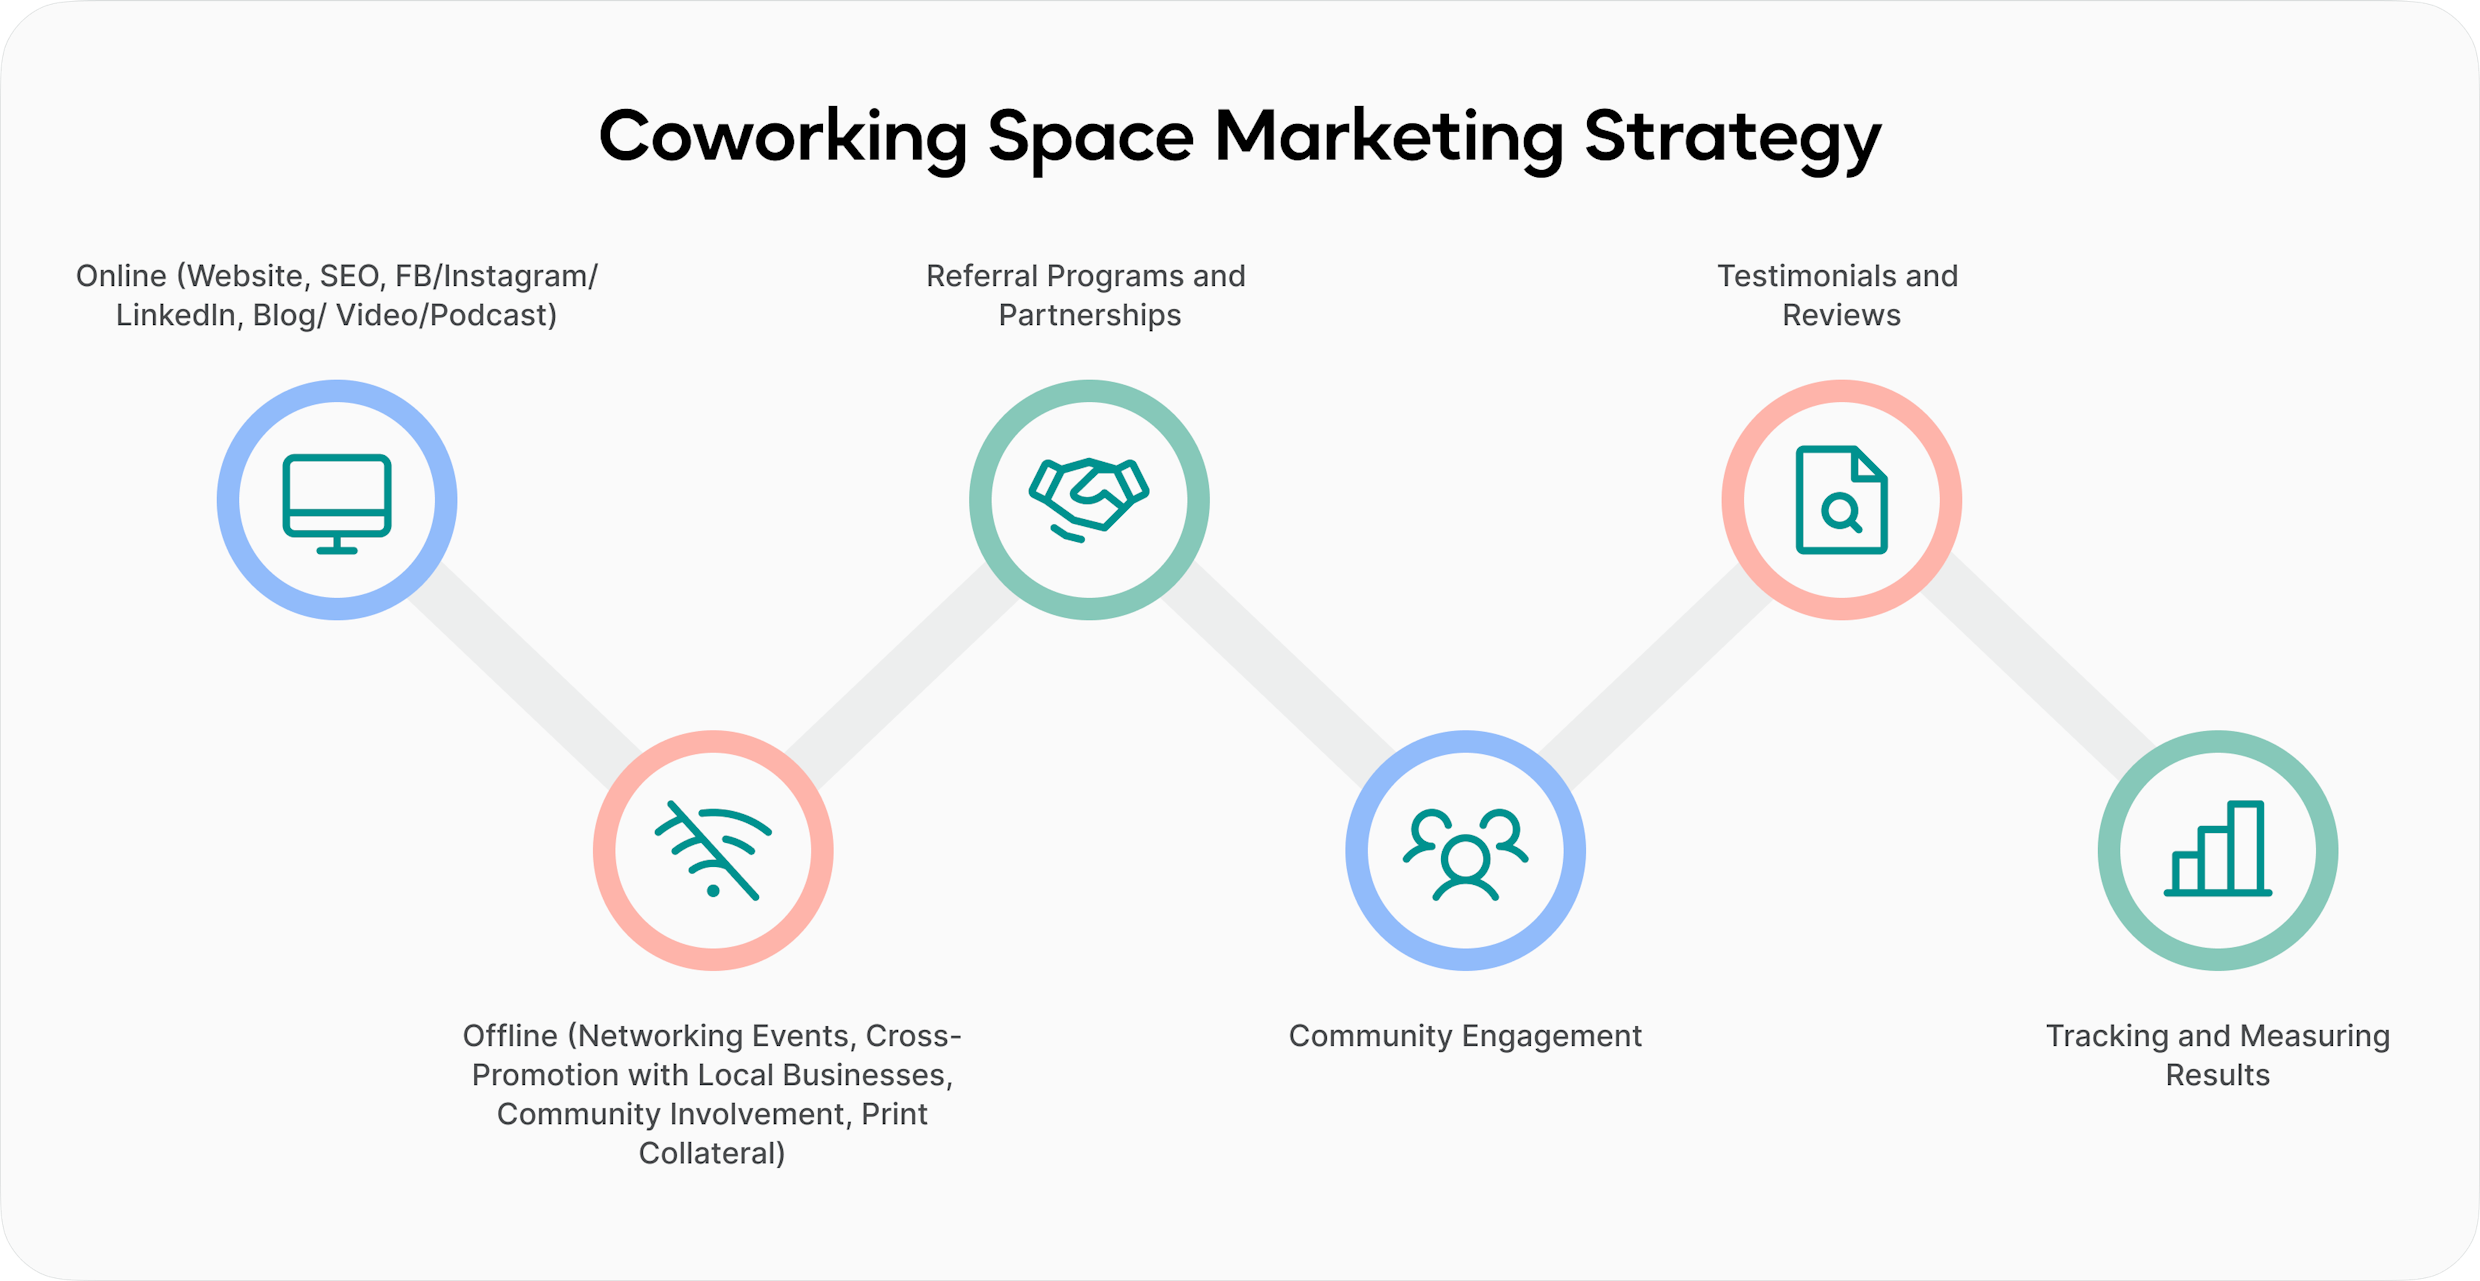 Coworking space marketing strategy